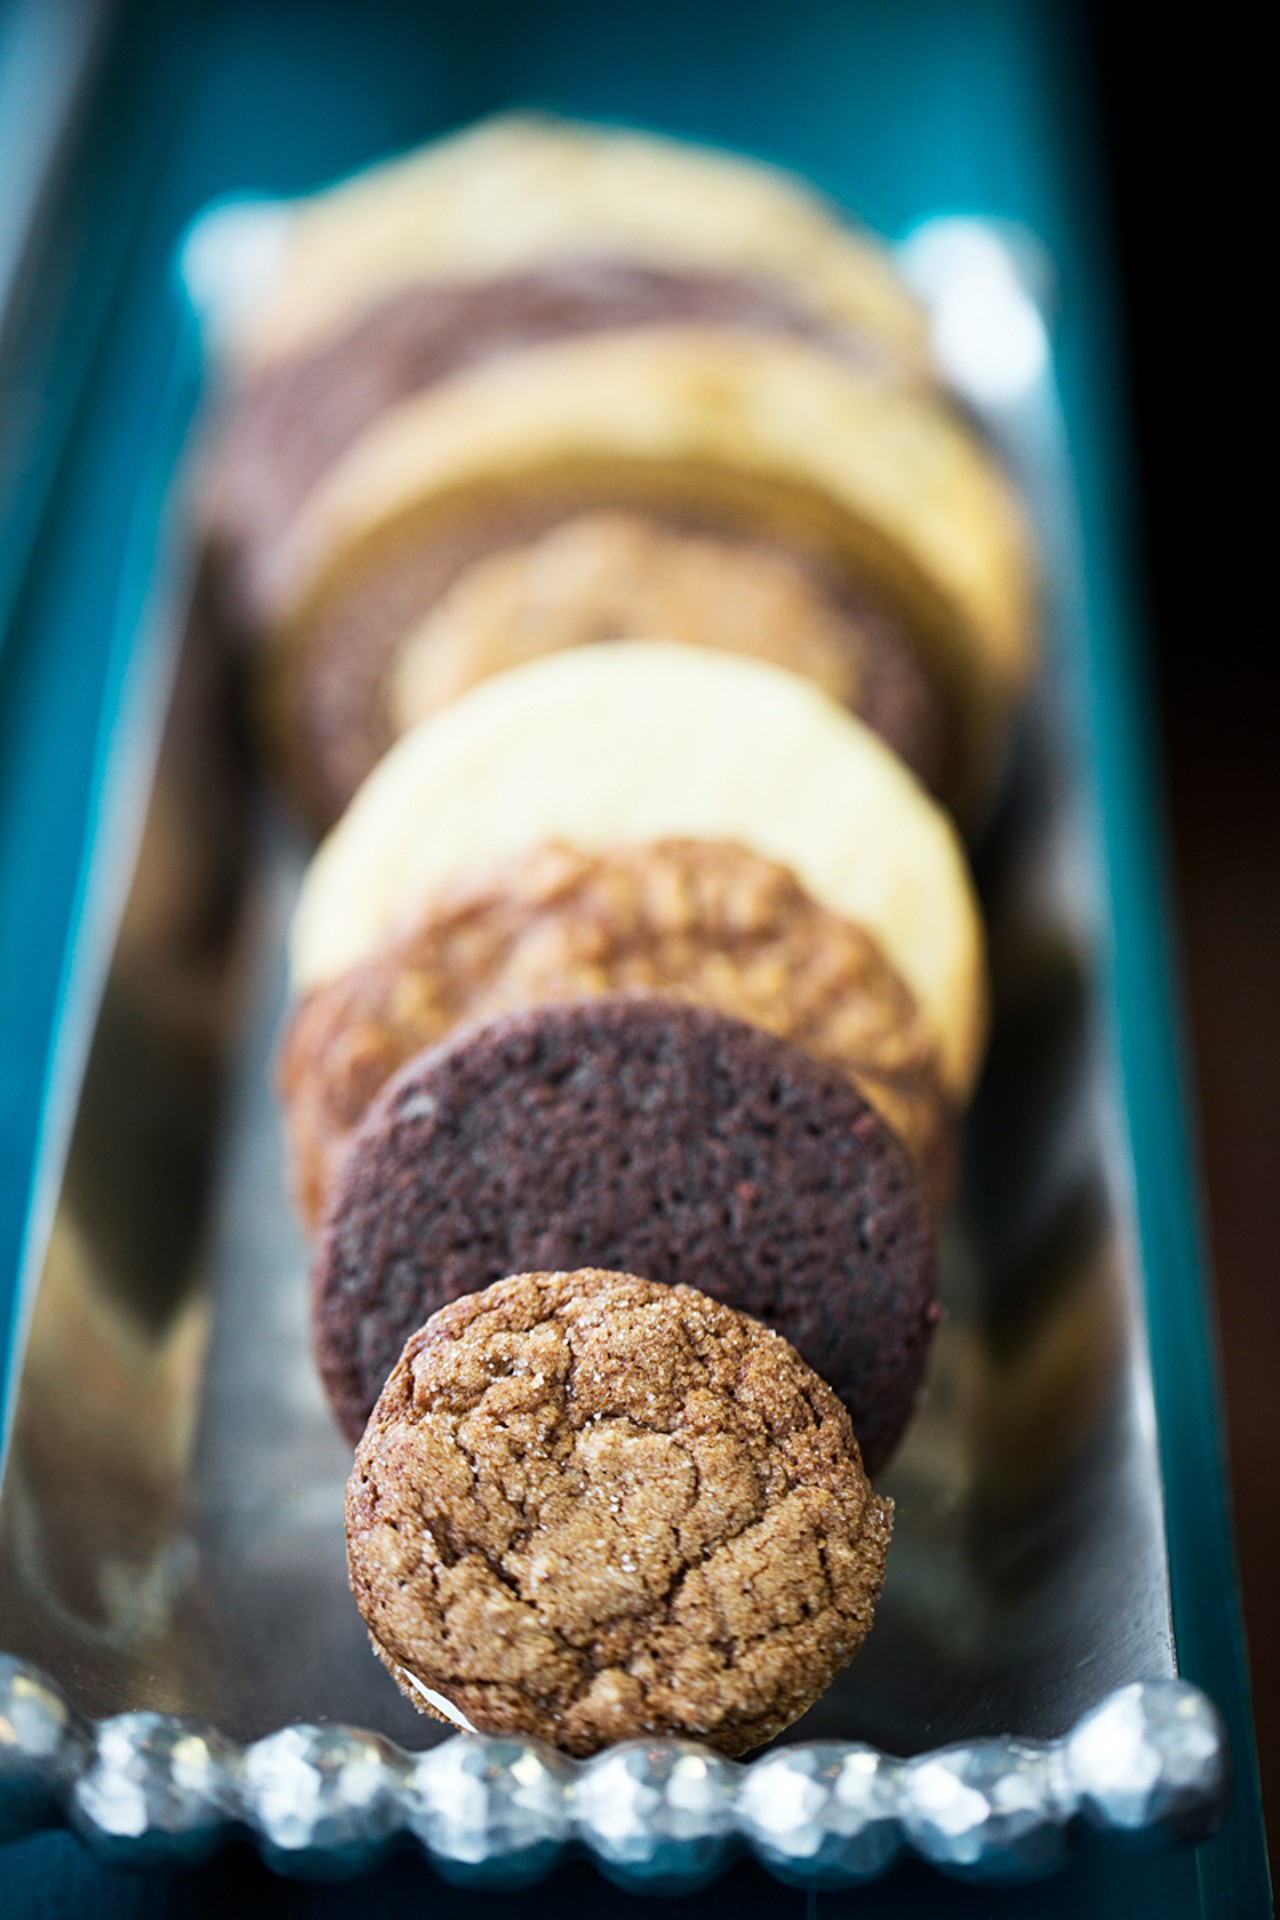 Assorted cookies at Pint Size.